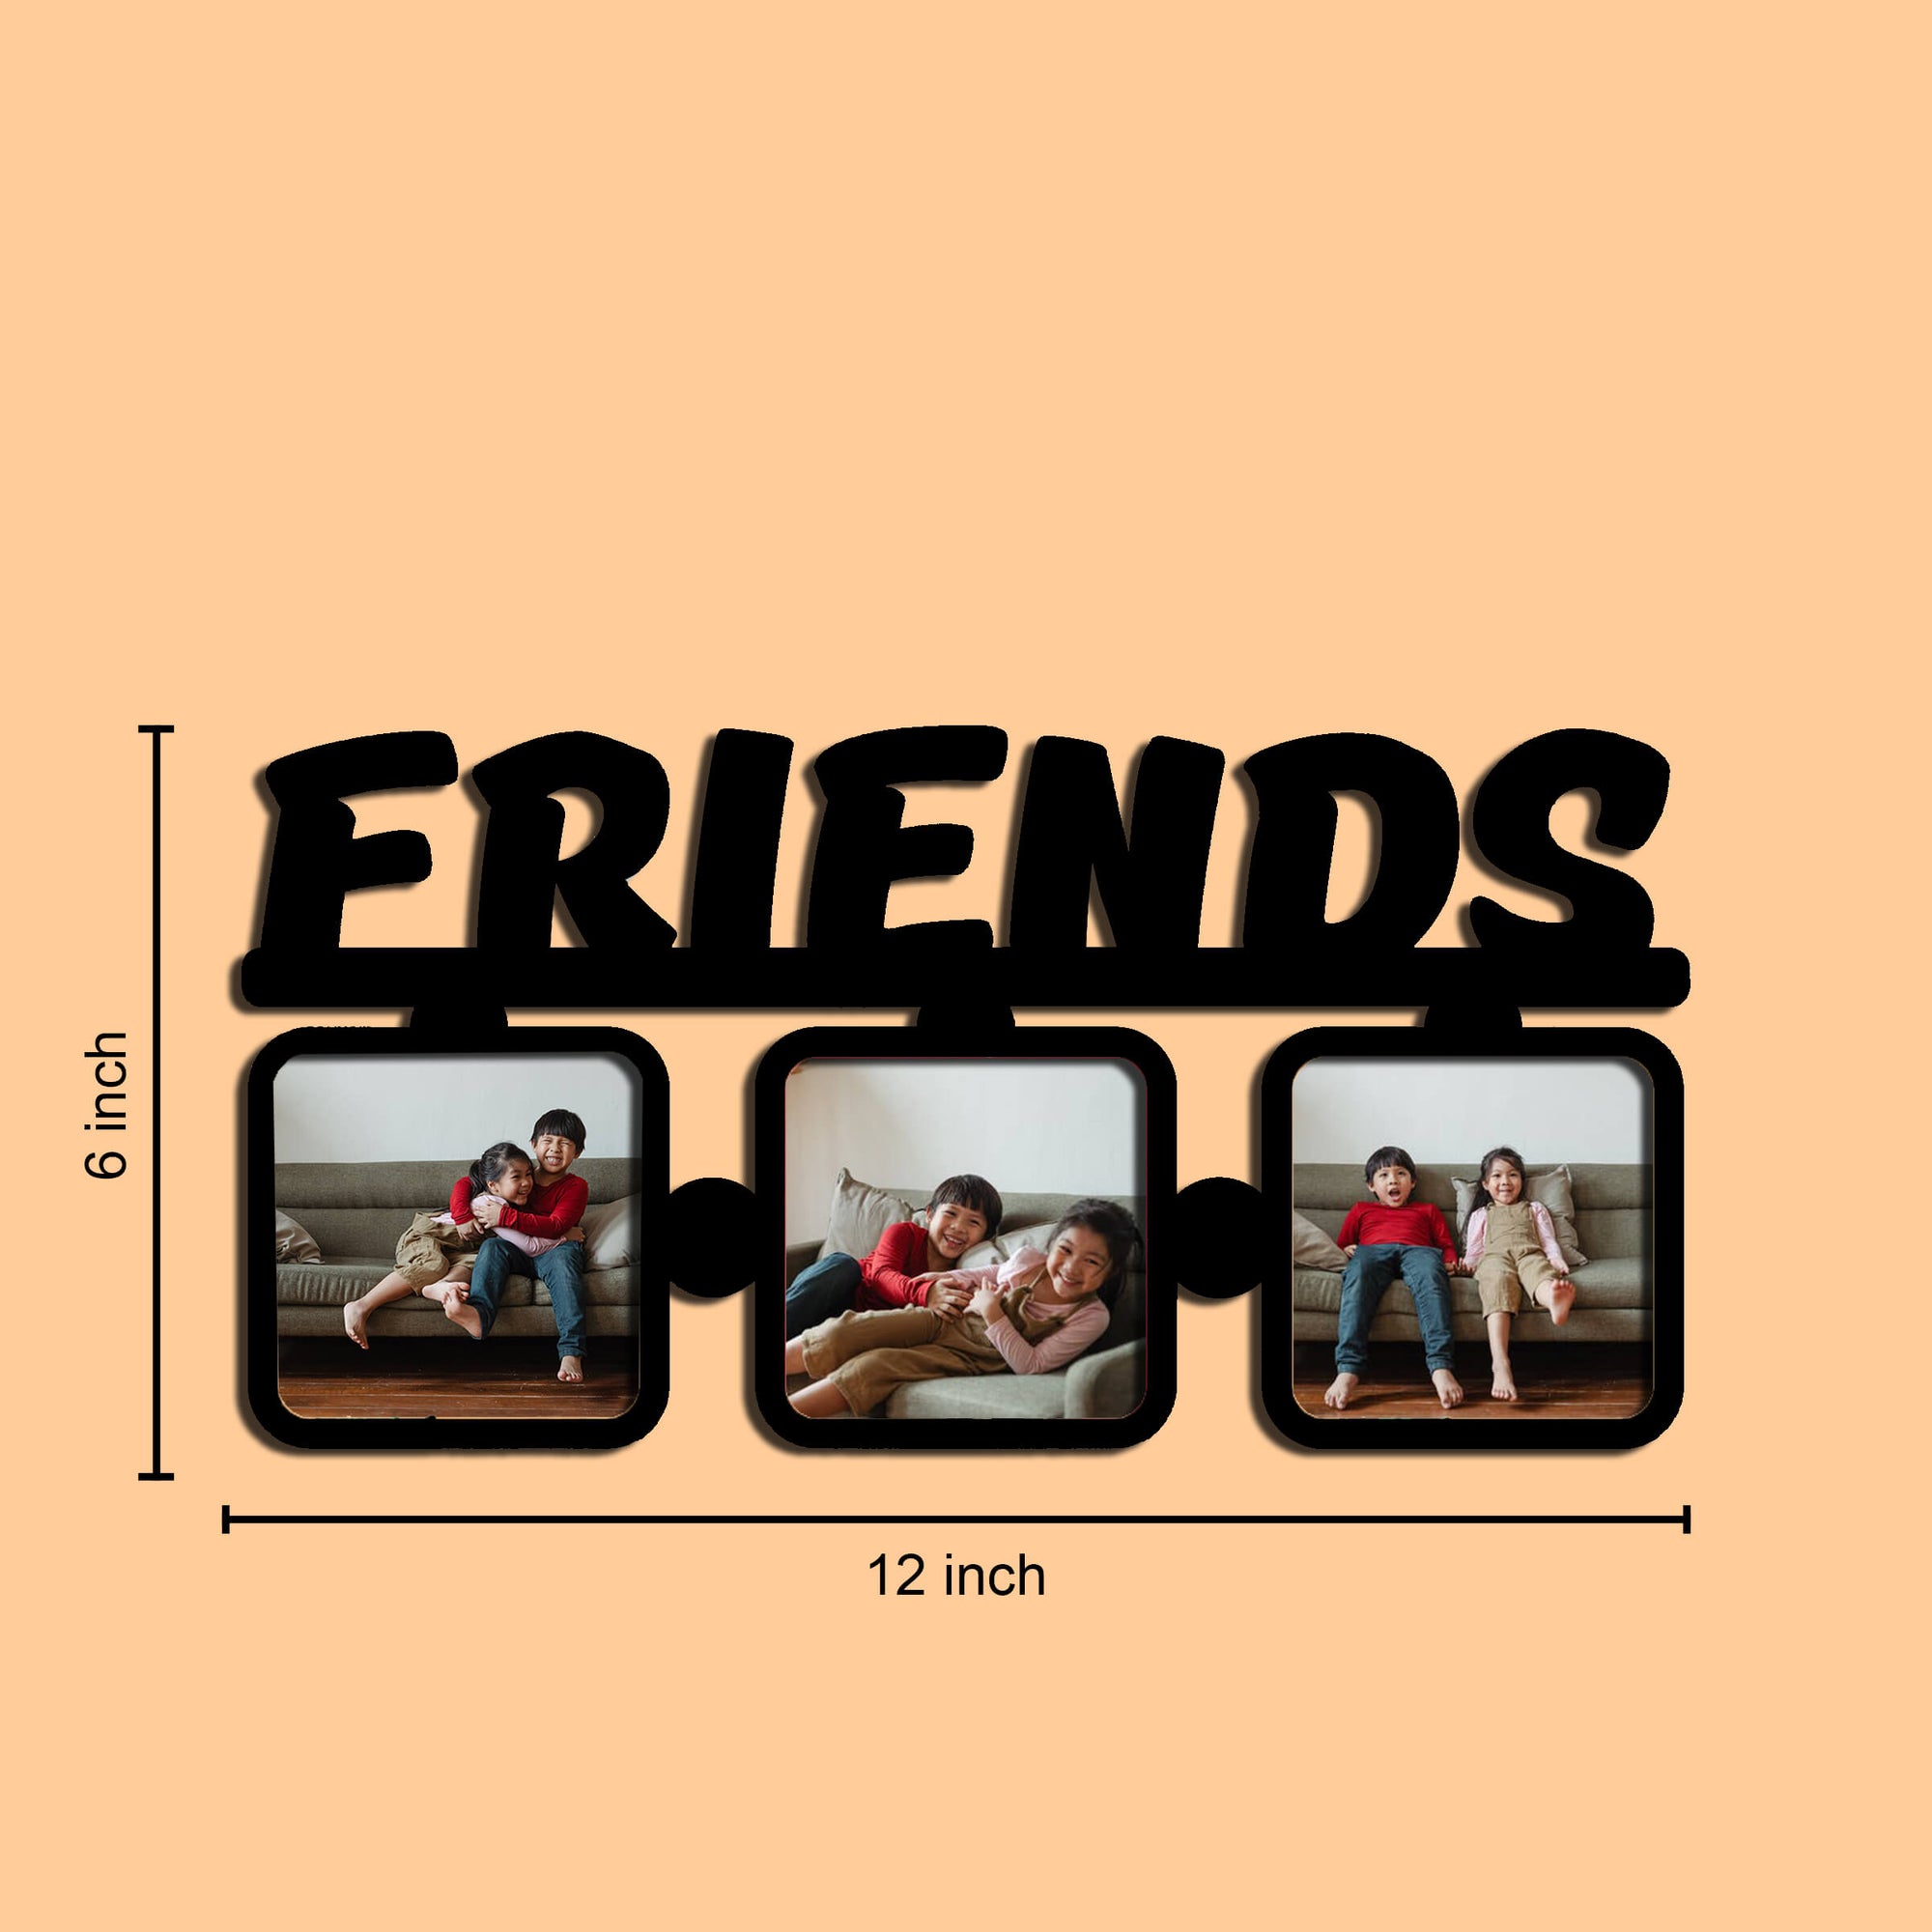 Laser Cut Photo Frame for Friends Photos - MDF Wood, 12x6 Inches